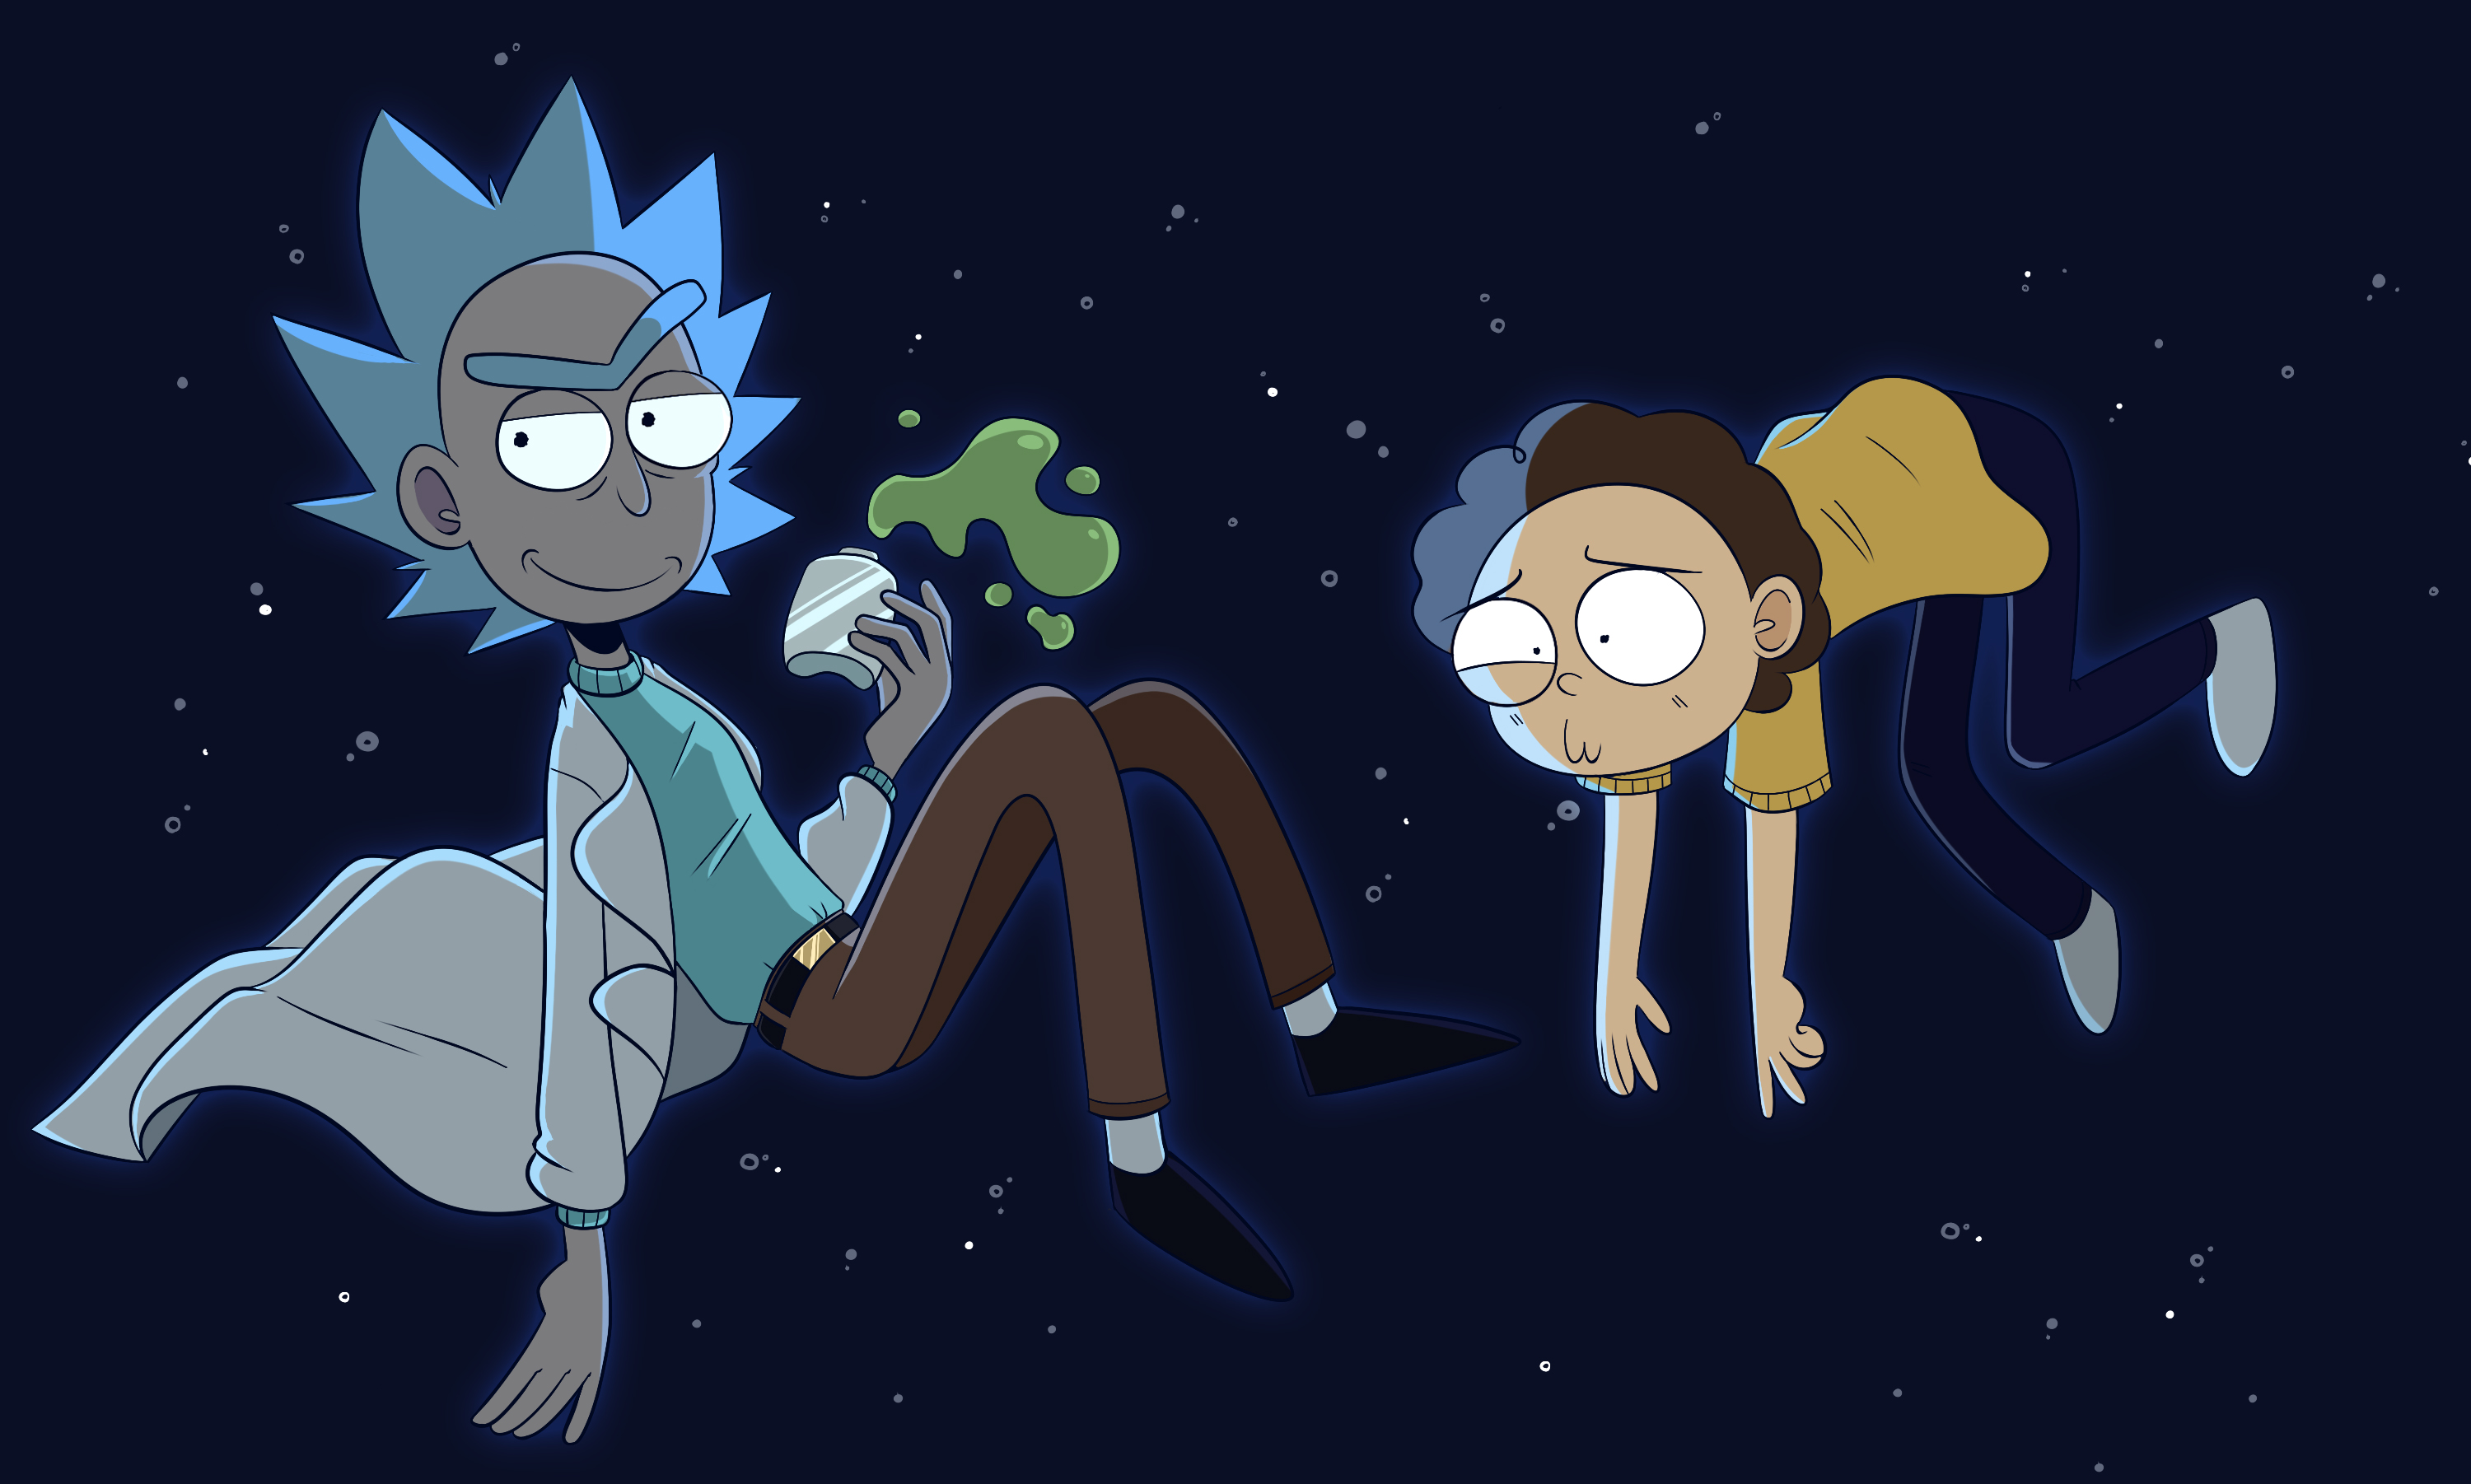 scientist, rick and morty, tv show, morty smith, rick sanchez, space